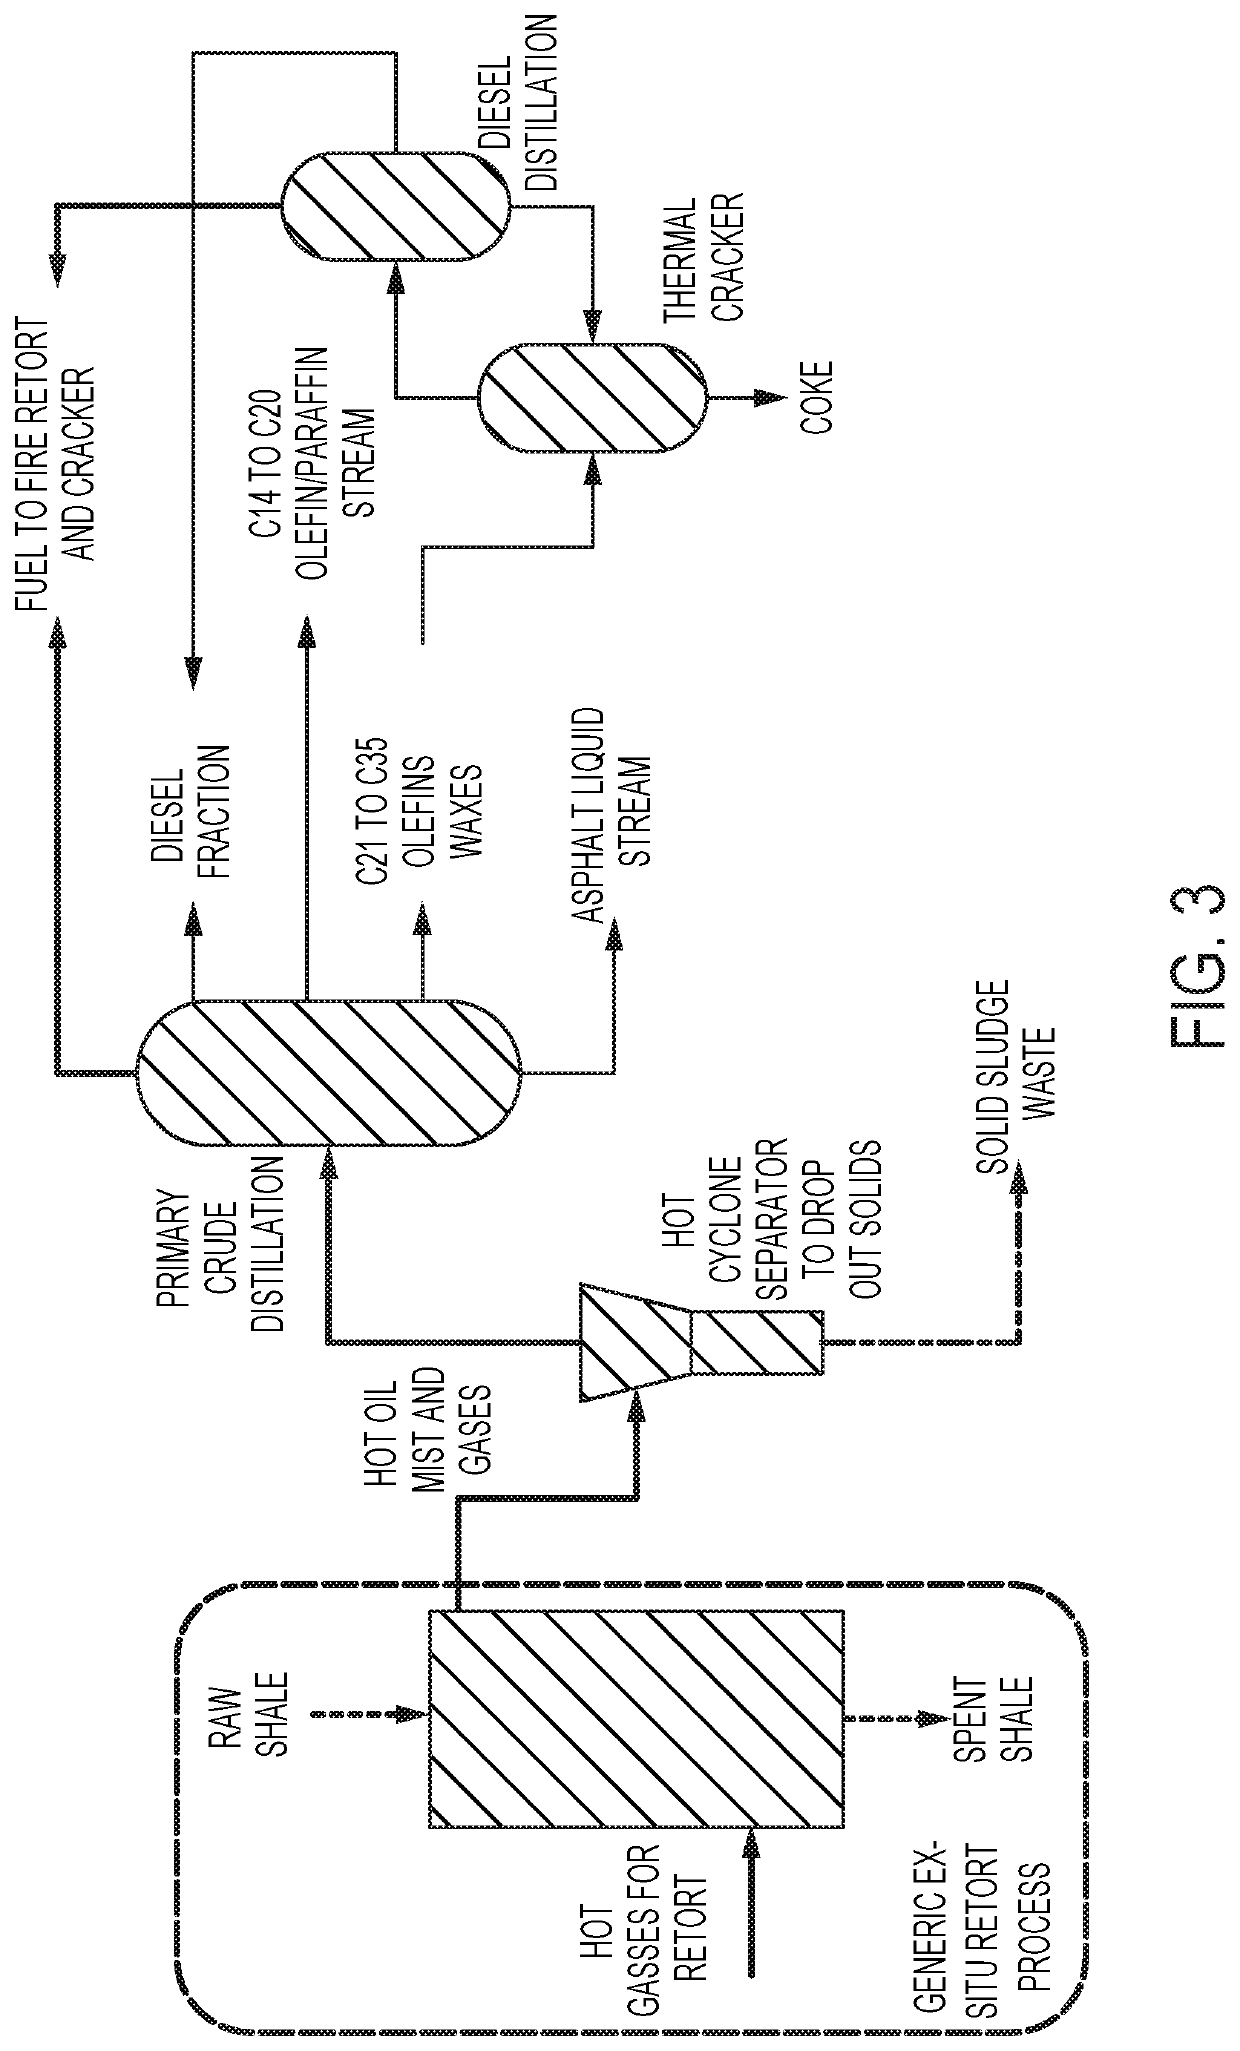 Methods and systems for retorting oil shale and upgrading the hydrocarbons obtained therefrom